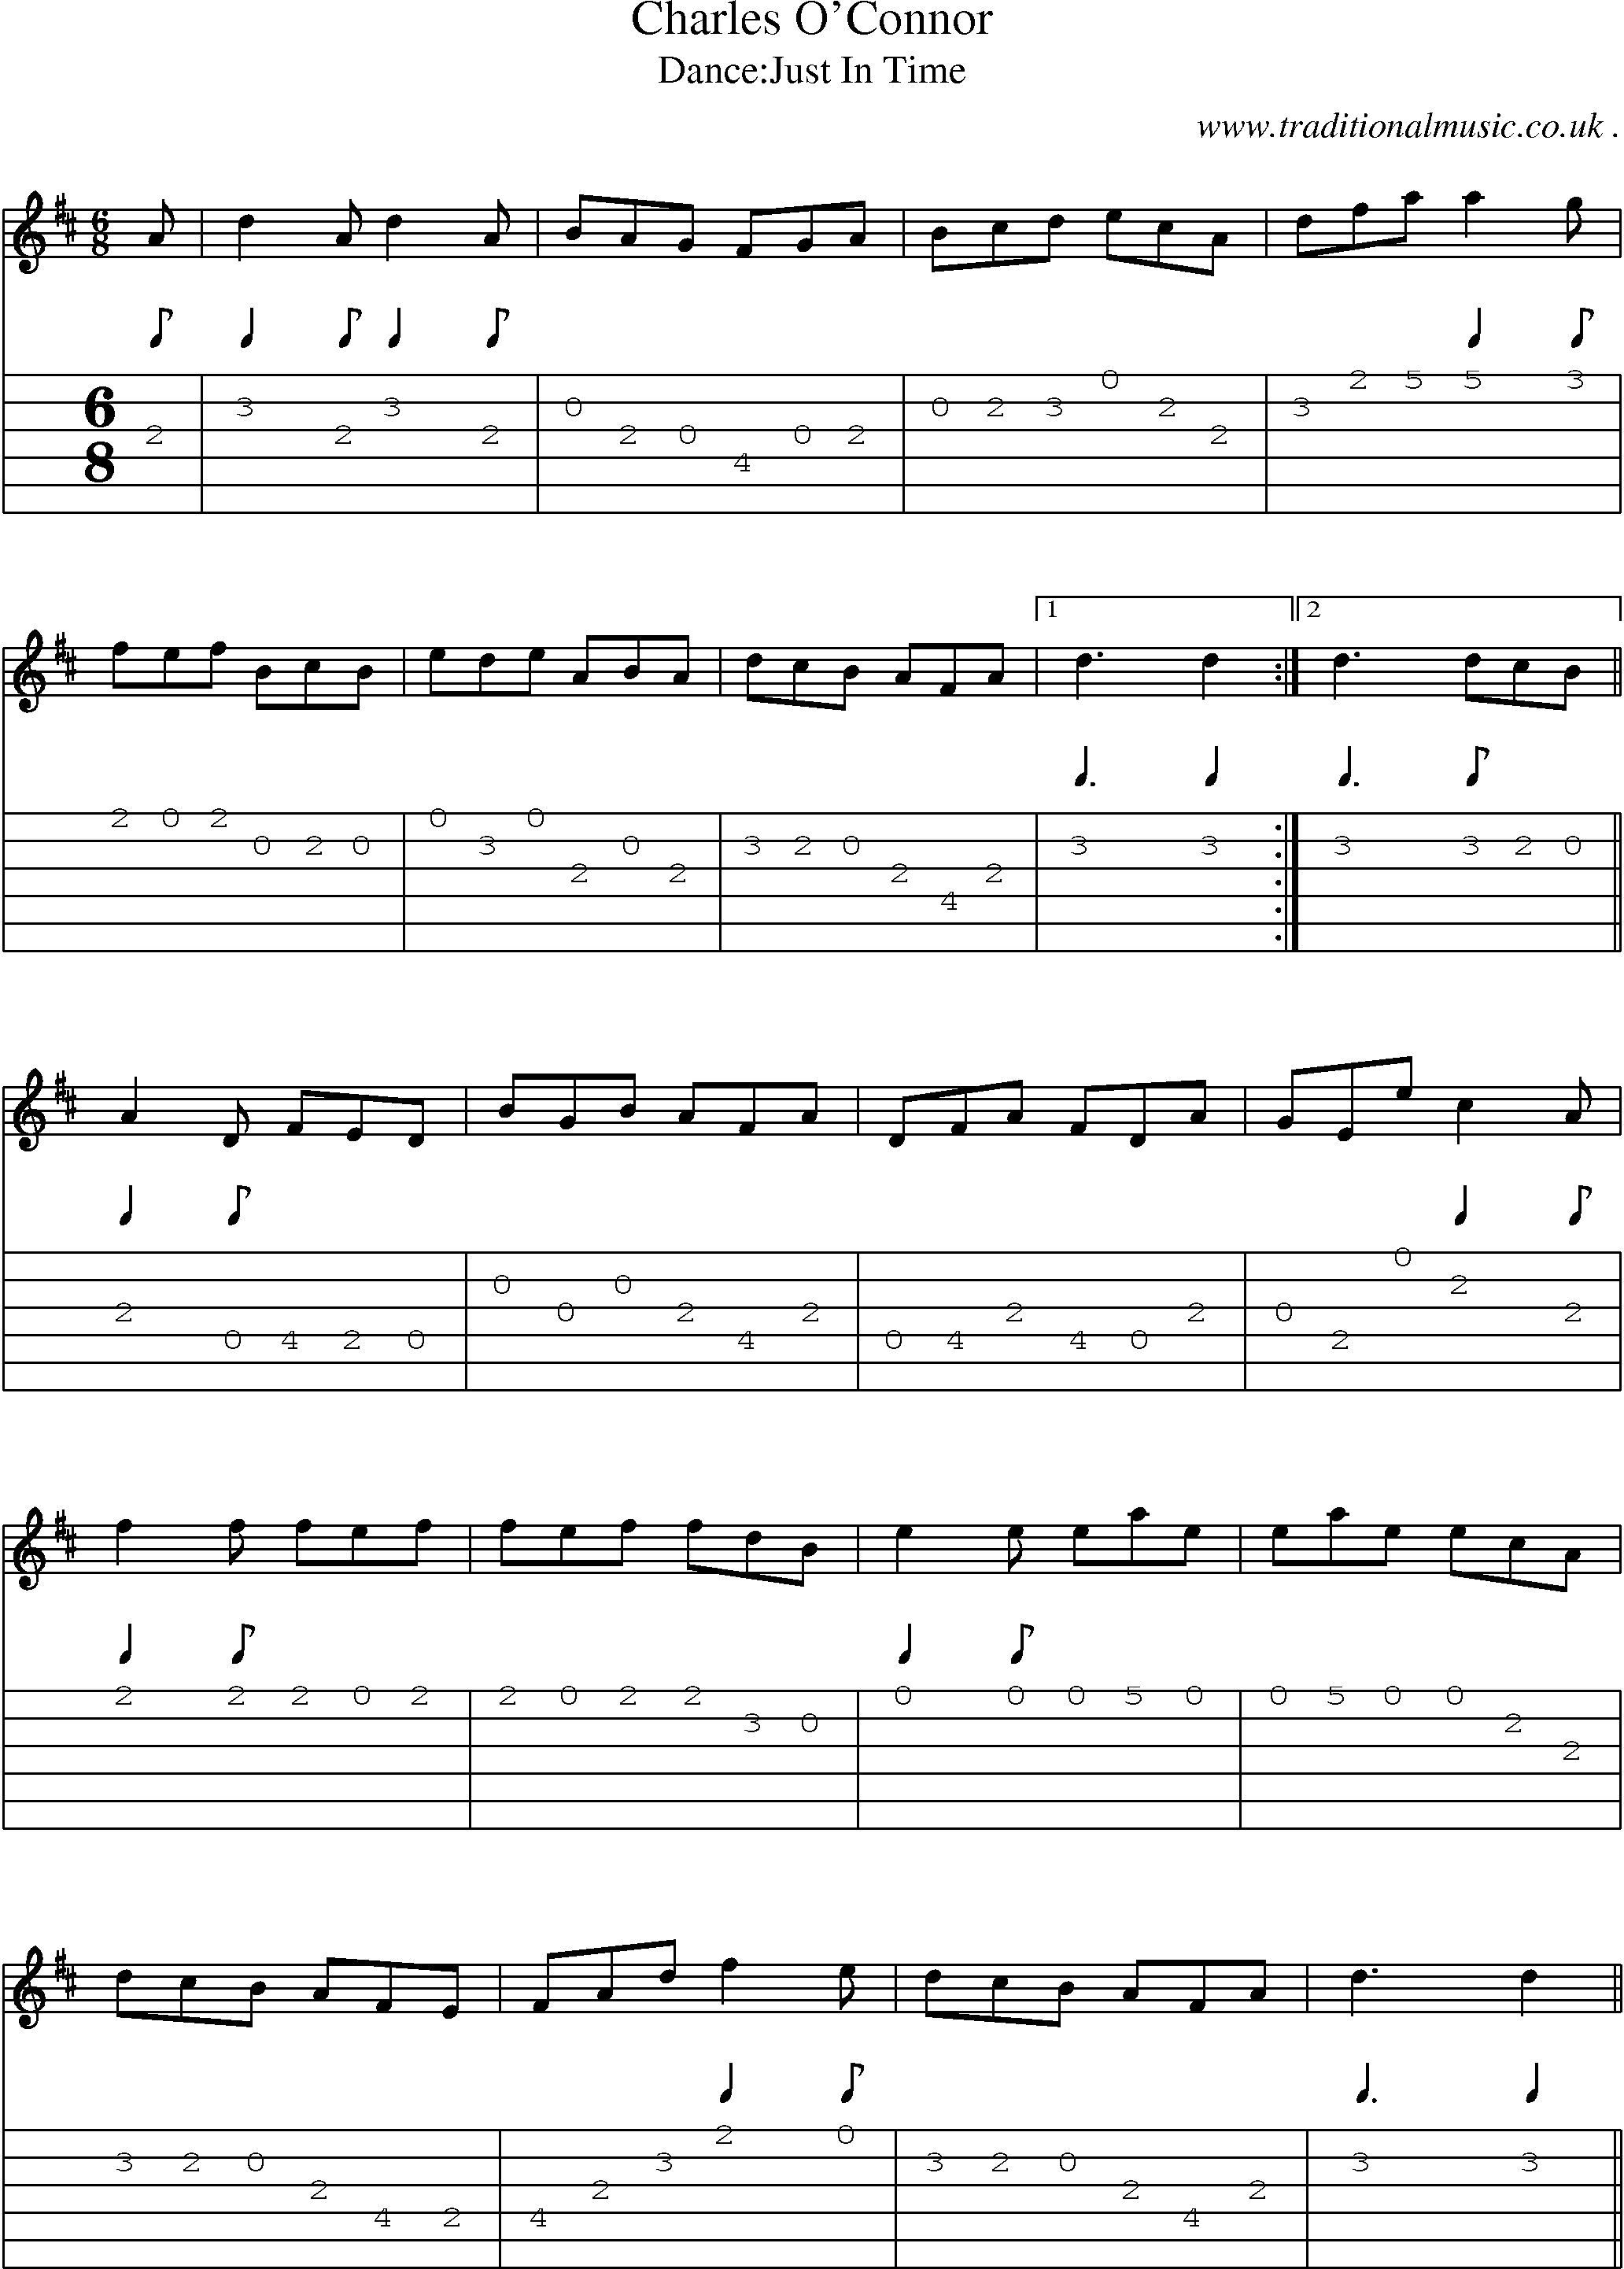 Sheet-Music and Guitar Tabs for Charles Oconnor